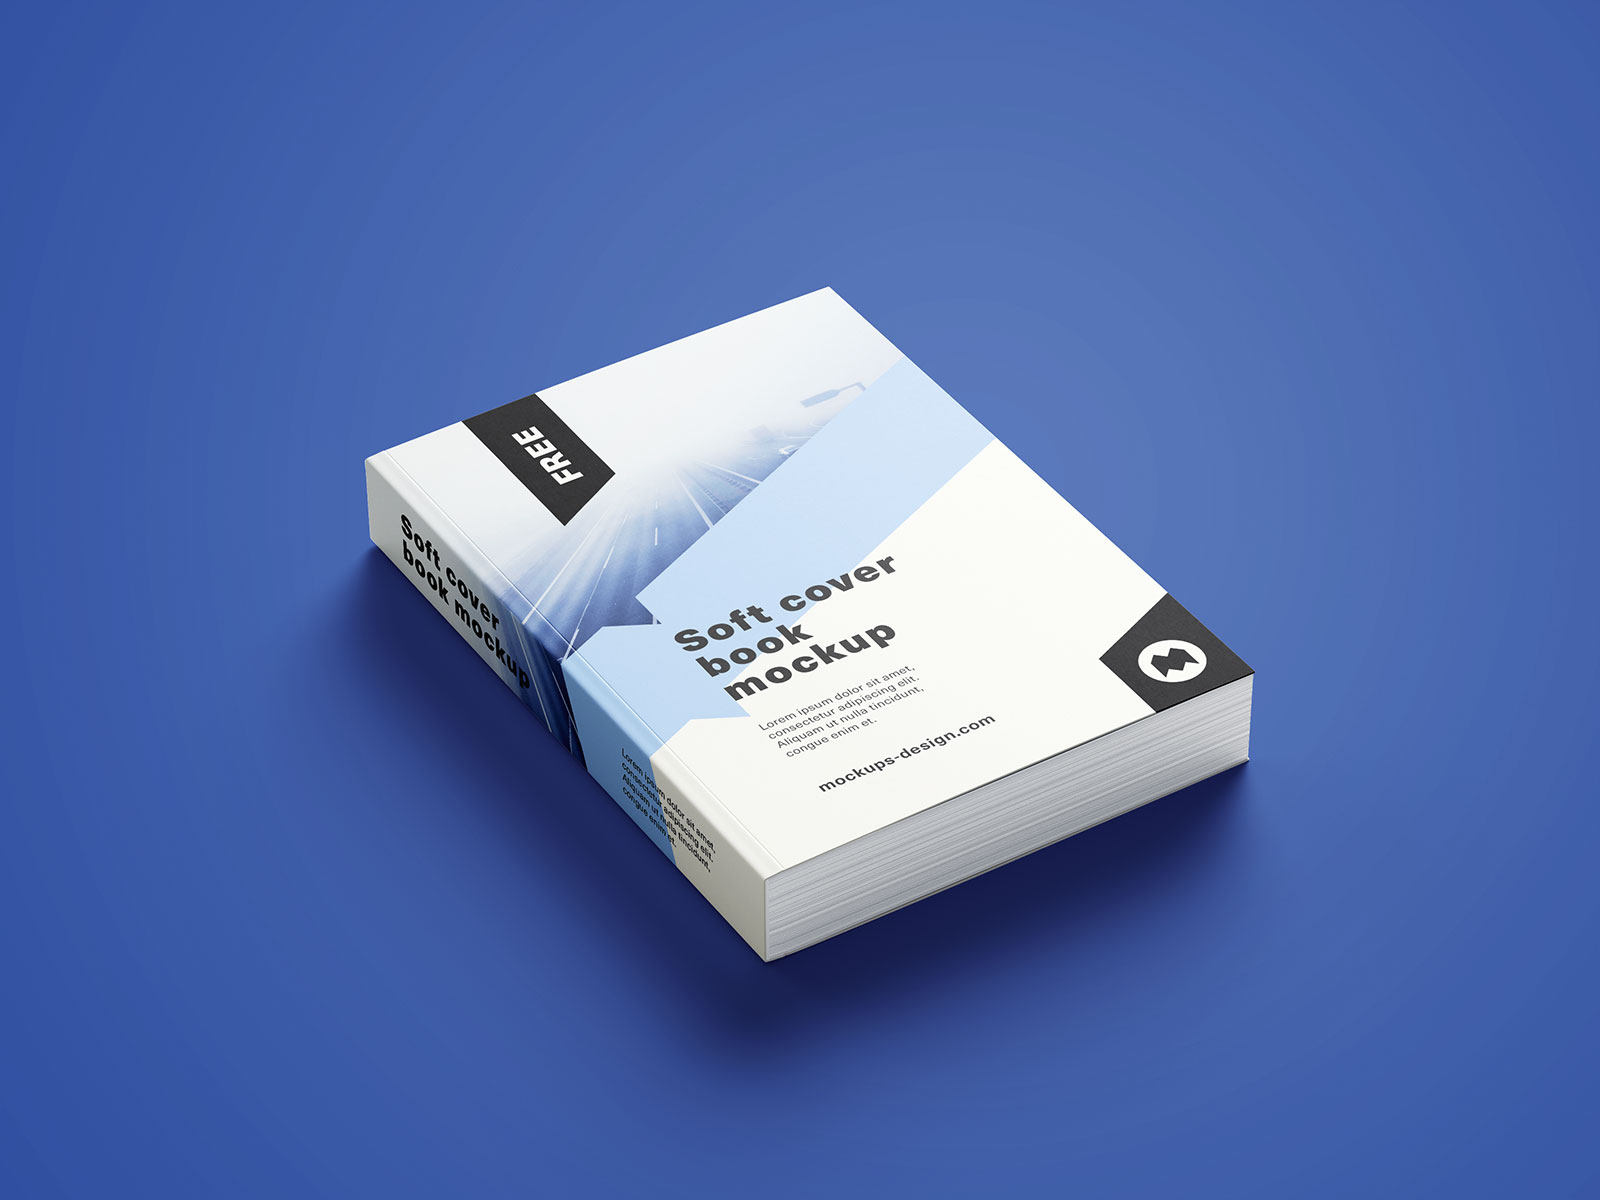 Softcover Book Mockup Set (11 fichiers)